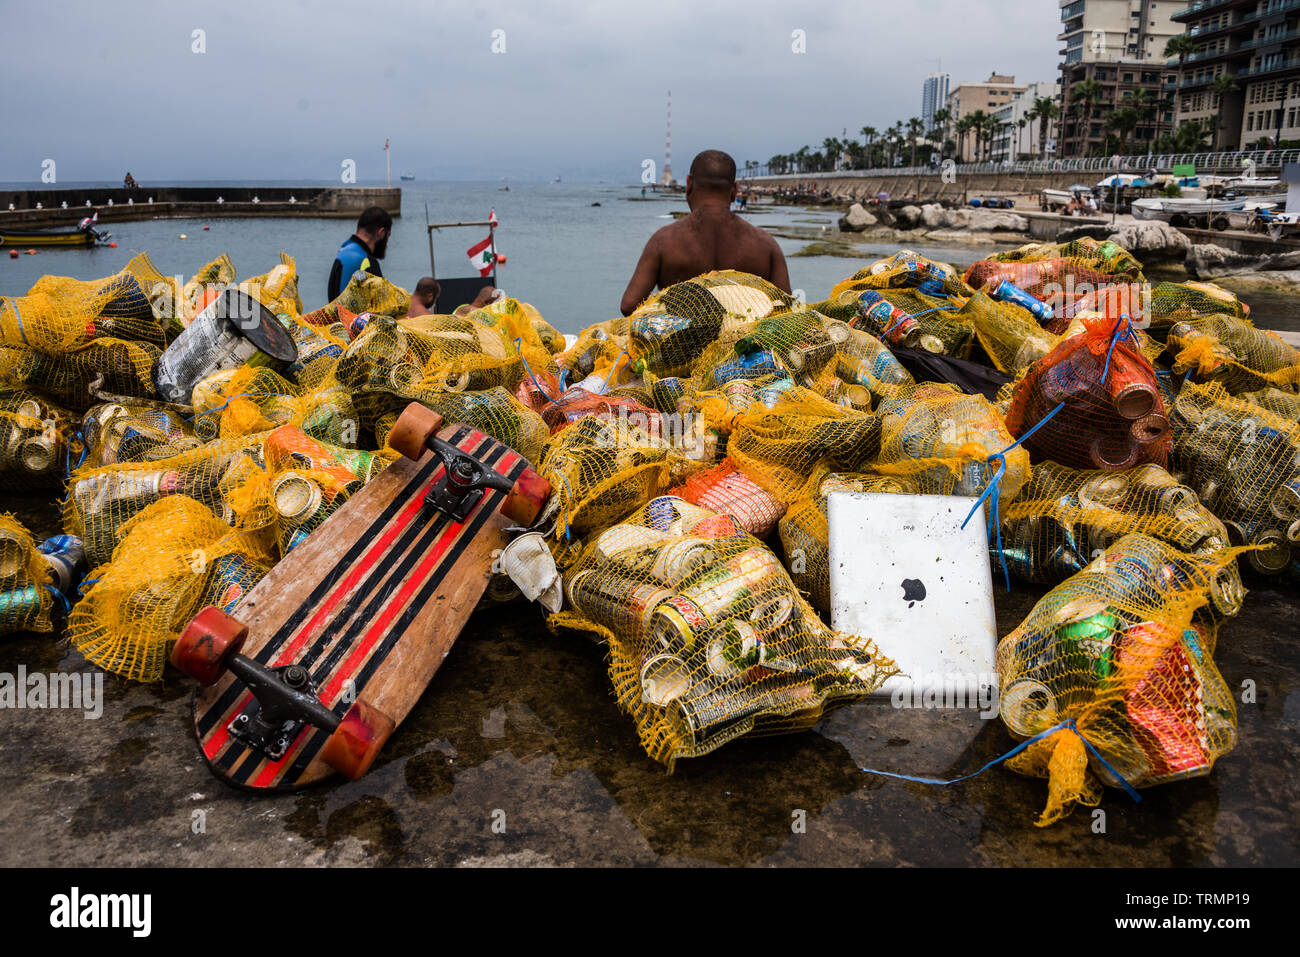 Calypso Dive Club members seen here clearing trash from the sea along Beirut's Corniche. Lebanese people came out en masse Sunday, to help out with a National Beach Cleanup Day spearheaded by the Lebanese Minister for Environment. Not only did they collect trash from their beaches at over 150 locations, teams of scuba divers also spent their Sunday underwater, clearing up everyone's waste from the ocean floor. Beirut, Lebanon, 9//6/2019 Stock Photo